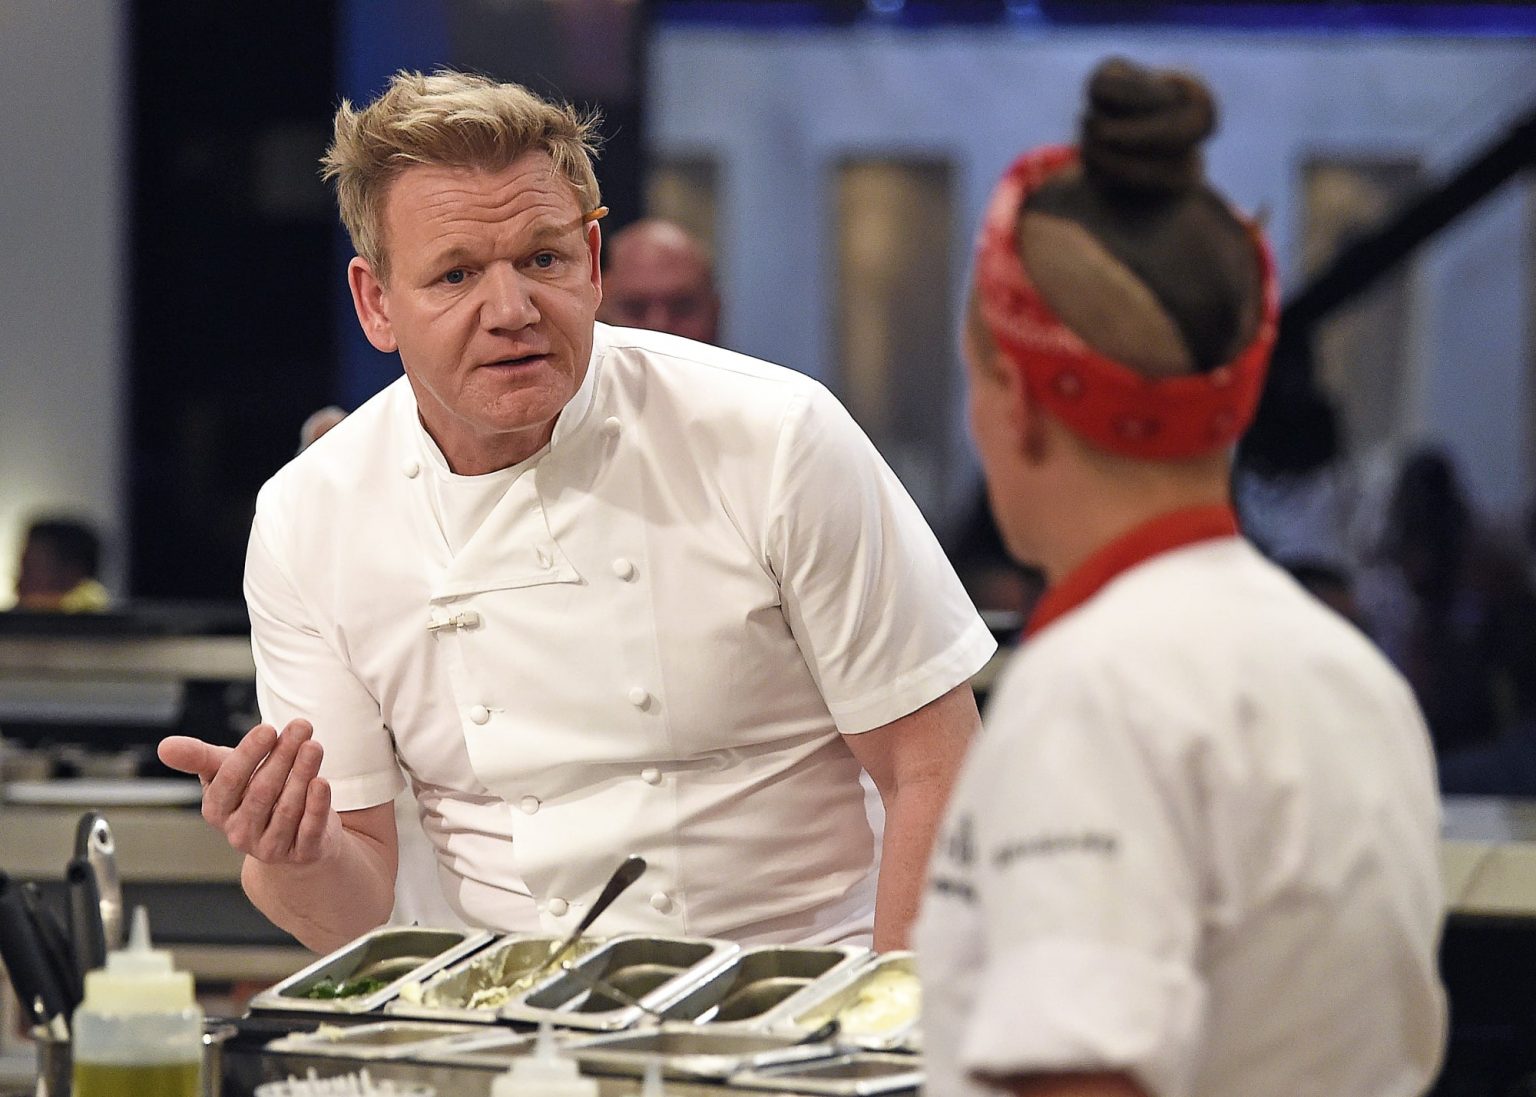 Hells Kitchen Season 20 Episodes 17 And 18 Release Date And Review Lariva Business